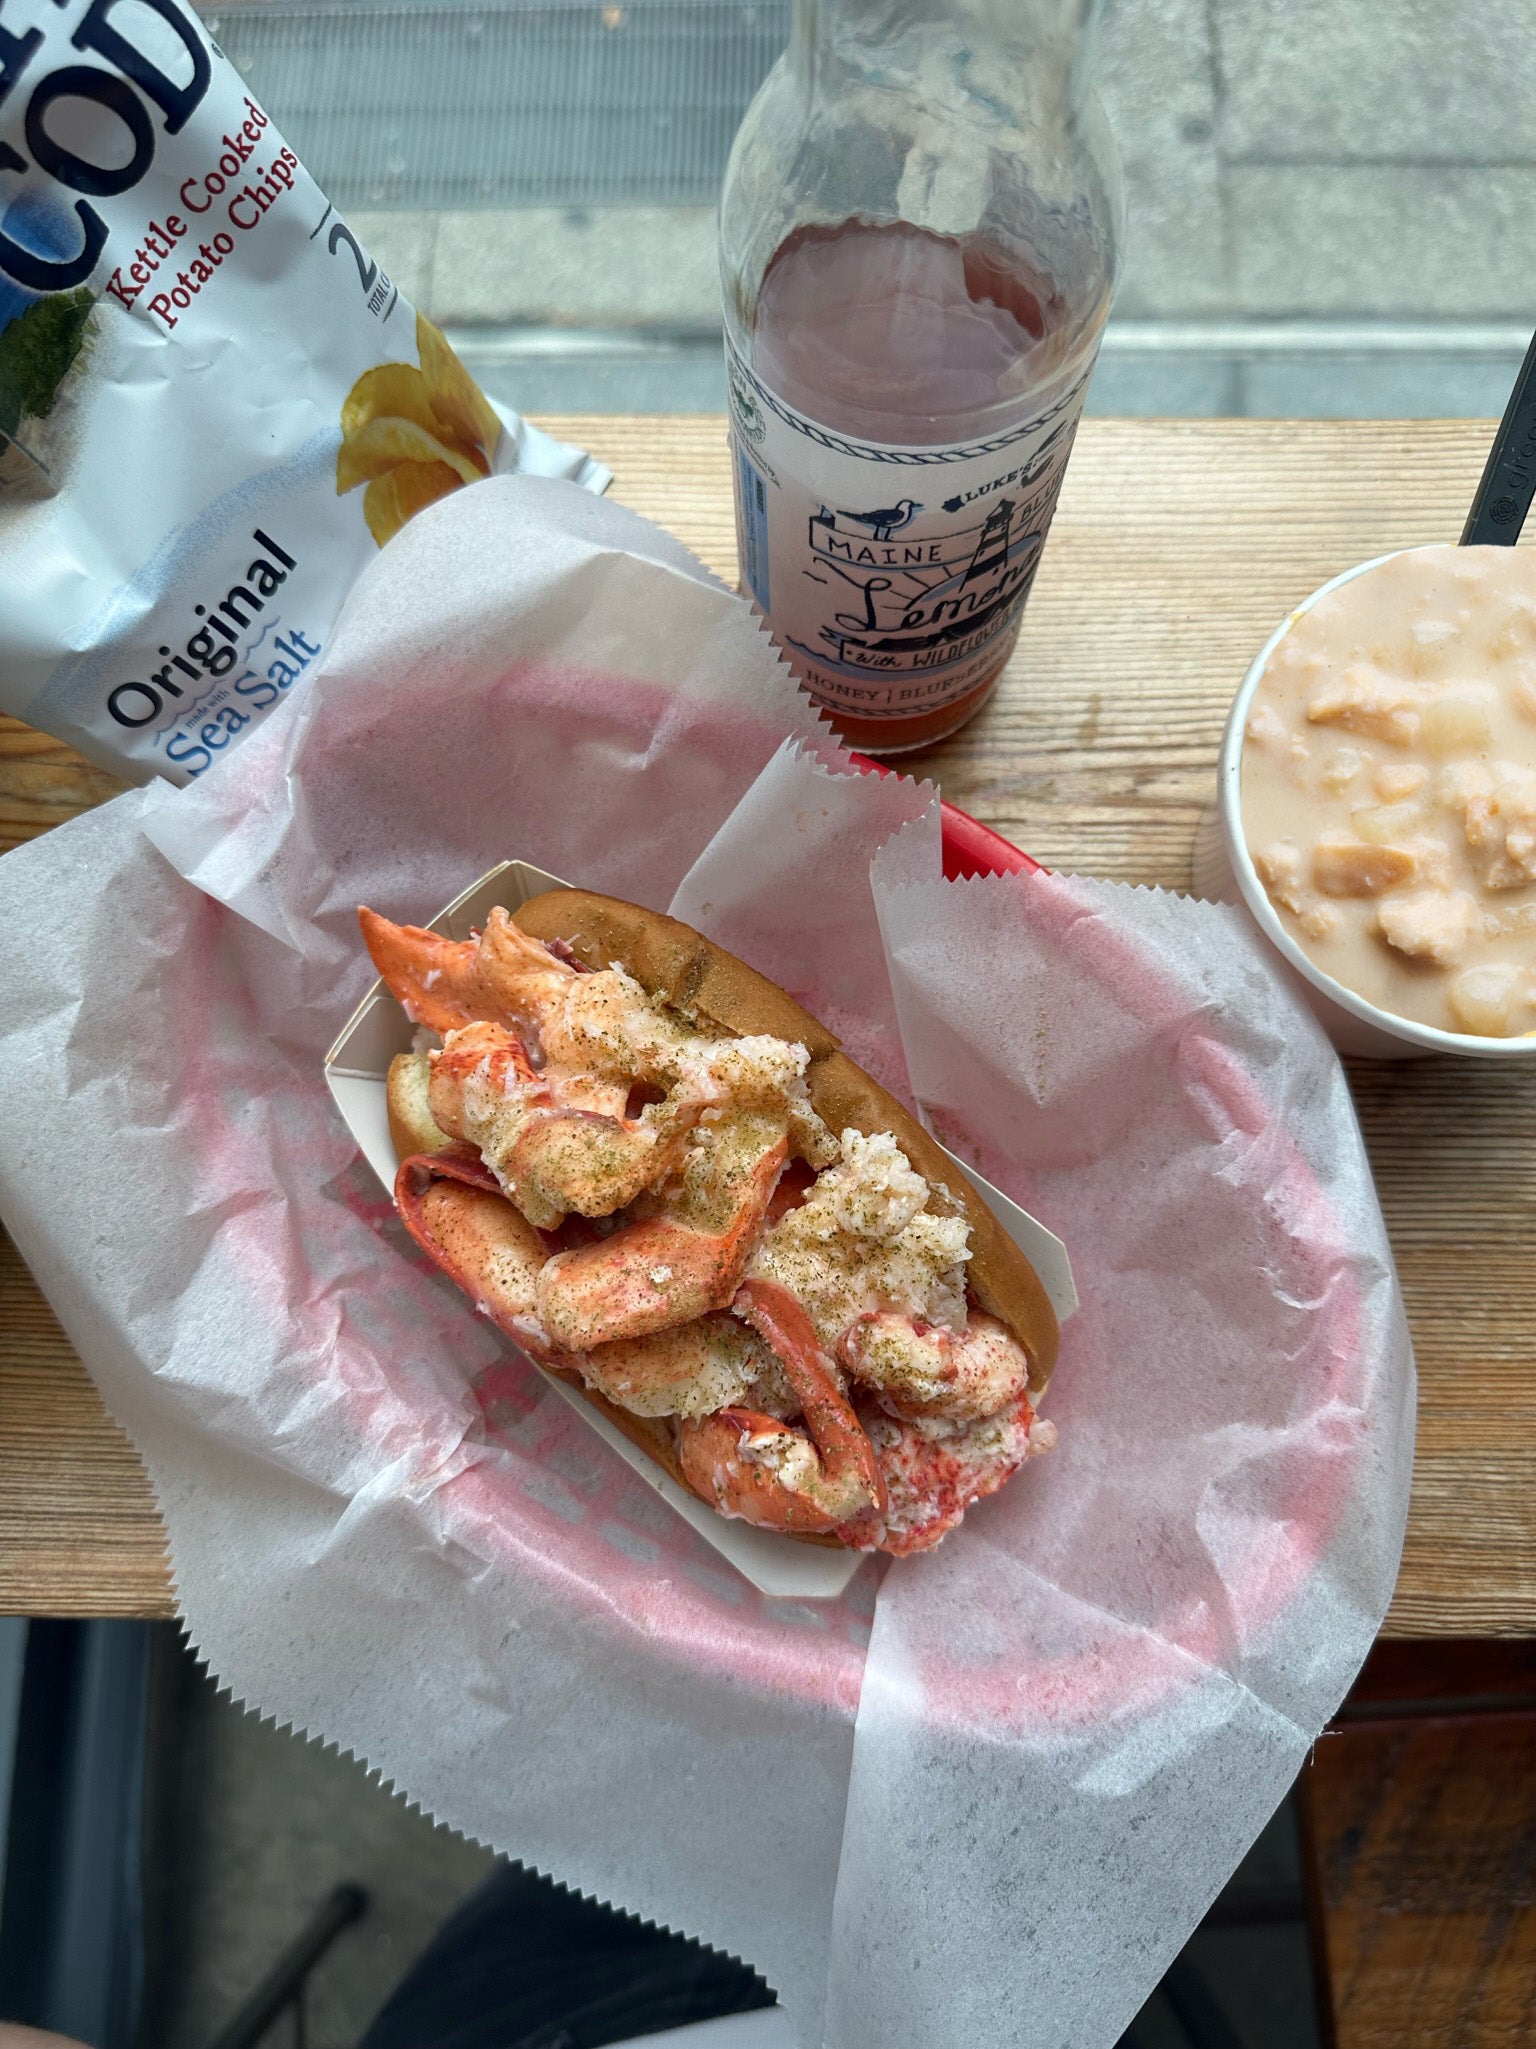 A lobster roll in a red basket lined with wax paper next to a bag of chips, a cup of chowder, and a blueberry lemonade